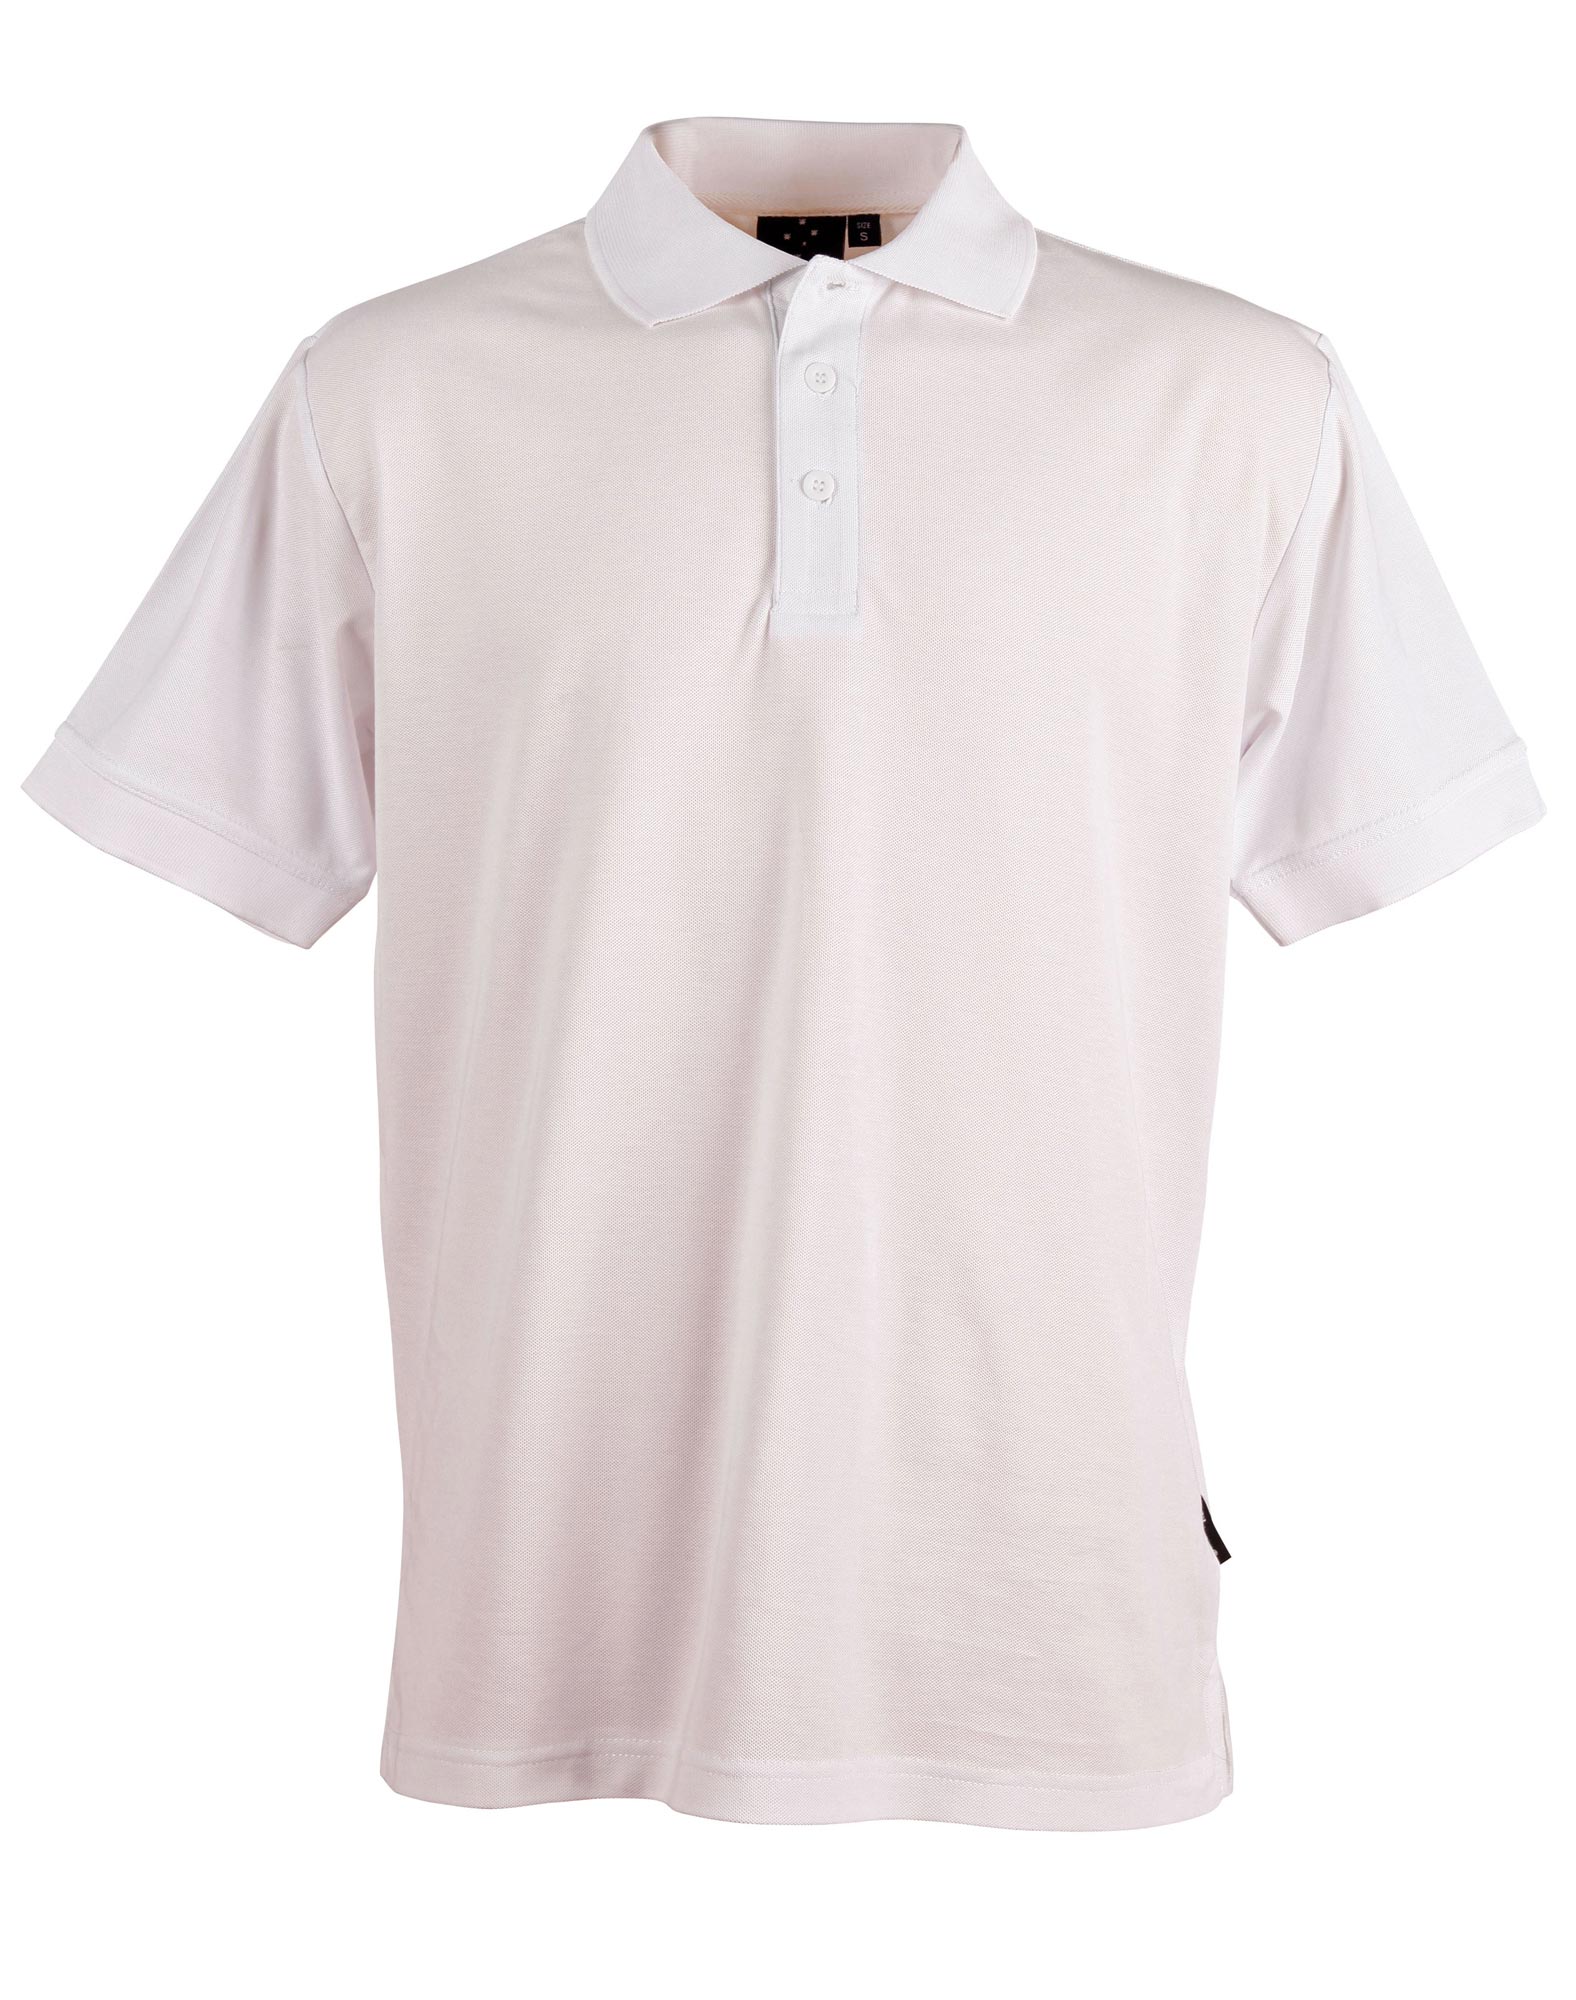 Open Colleges : Open Colleges (W-EMB) White Polo - uniformstar